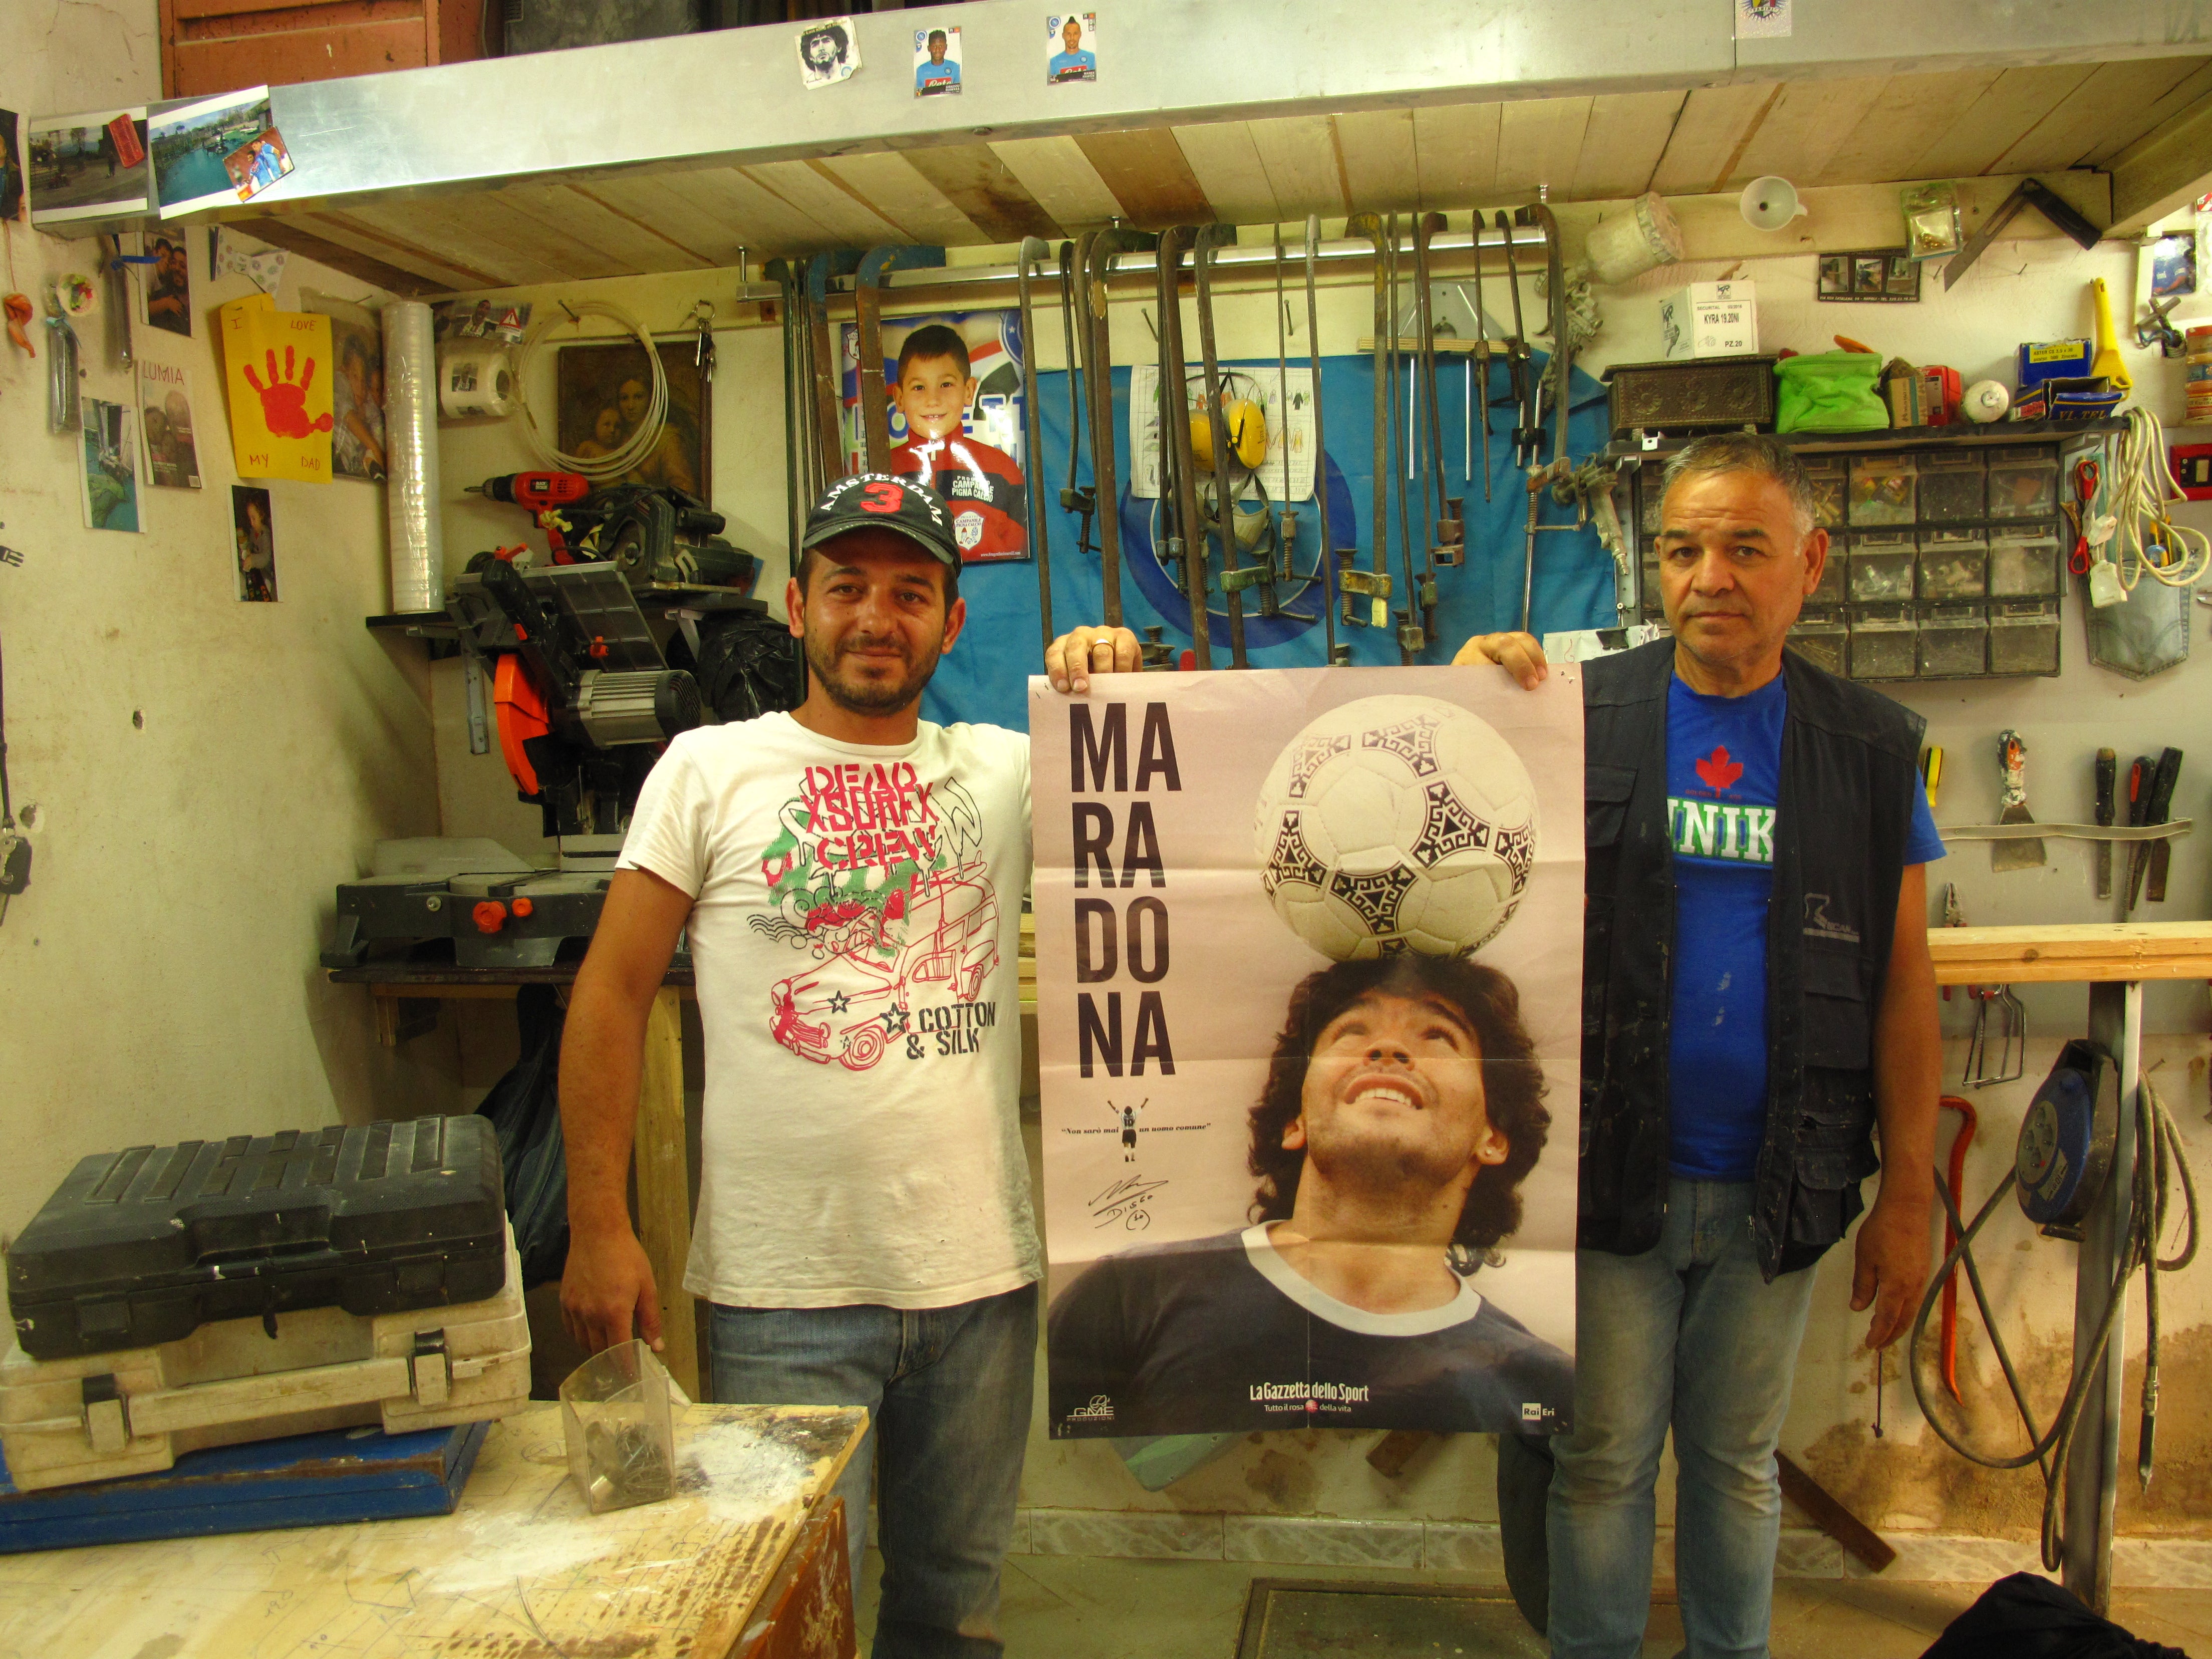 Carpenters with a Diego poster